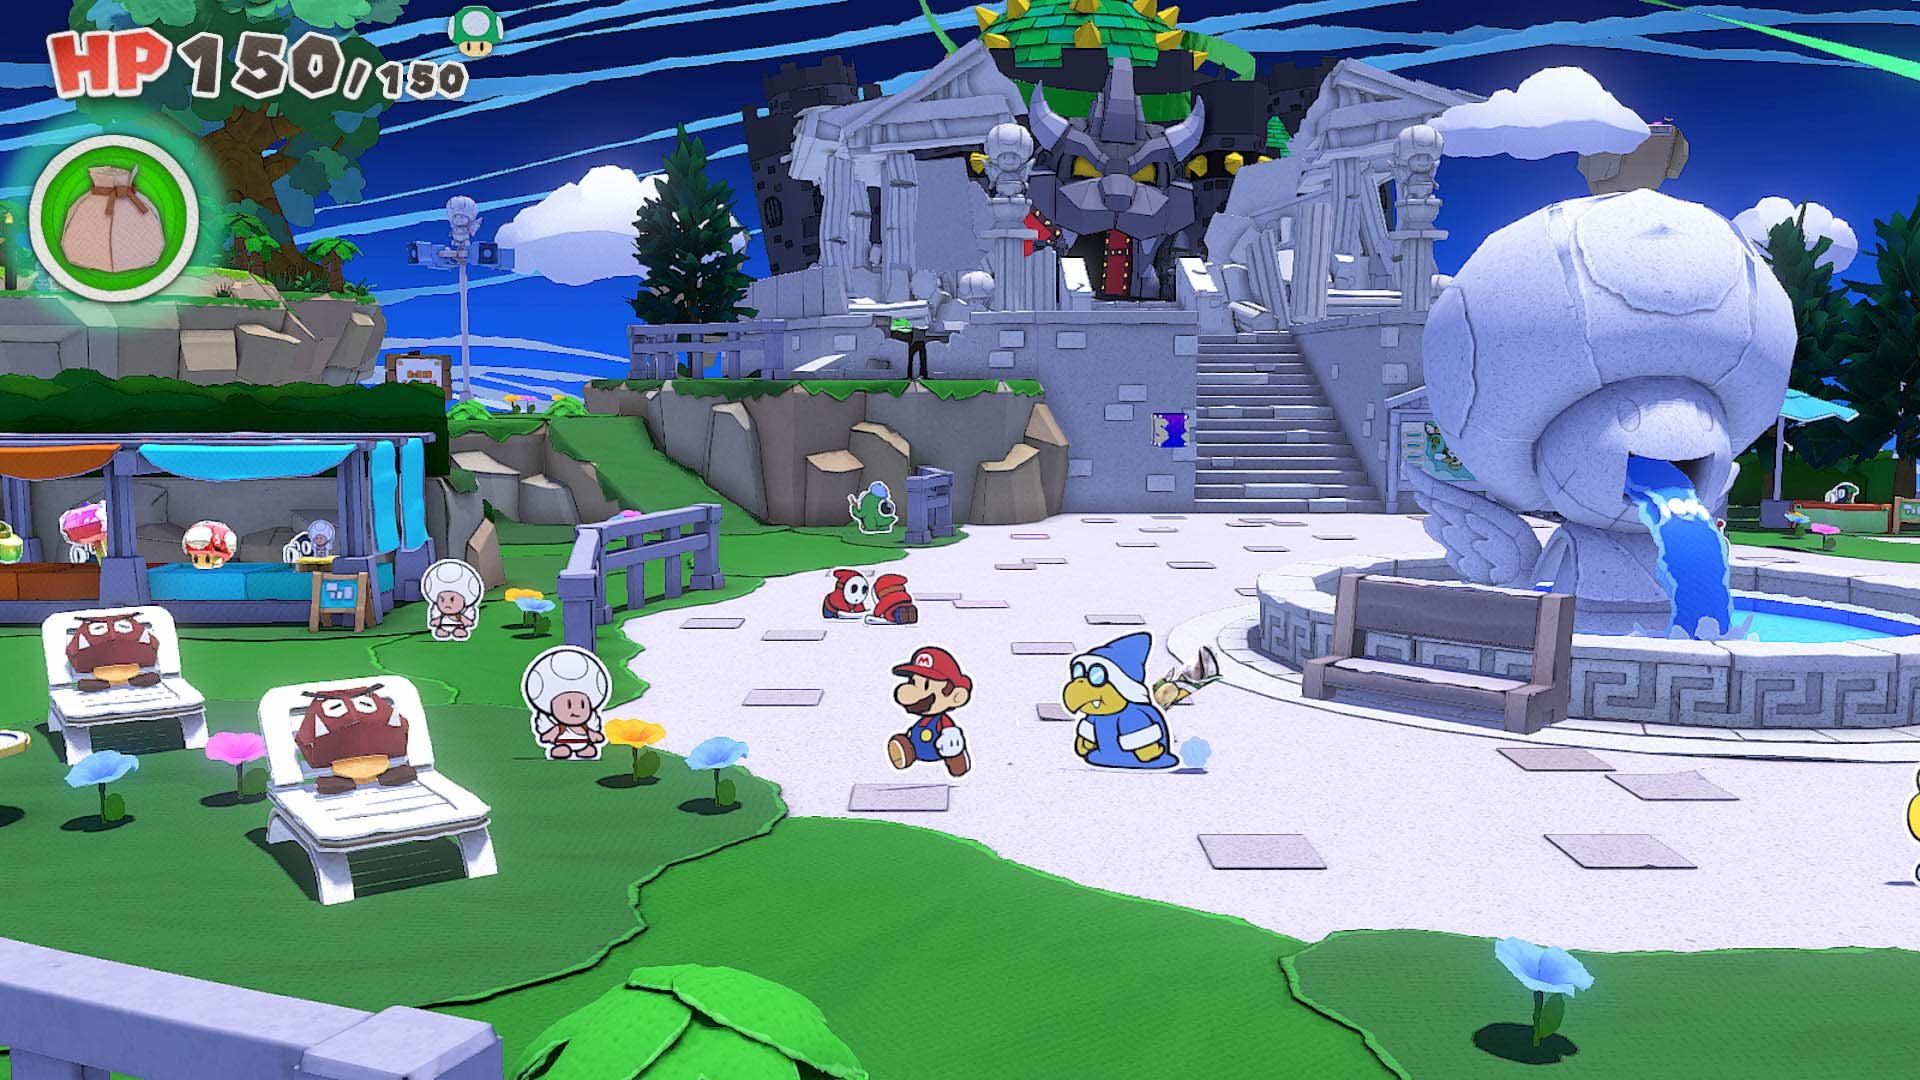 ICYMI: Clever Combat Details Unveiled for Paper Mario: The Origami